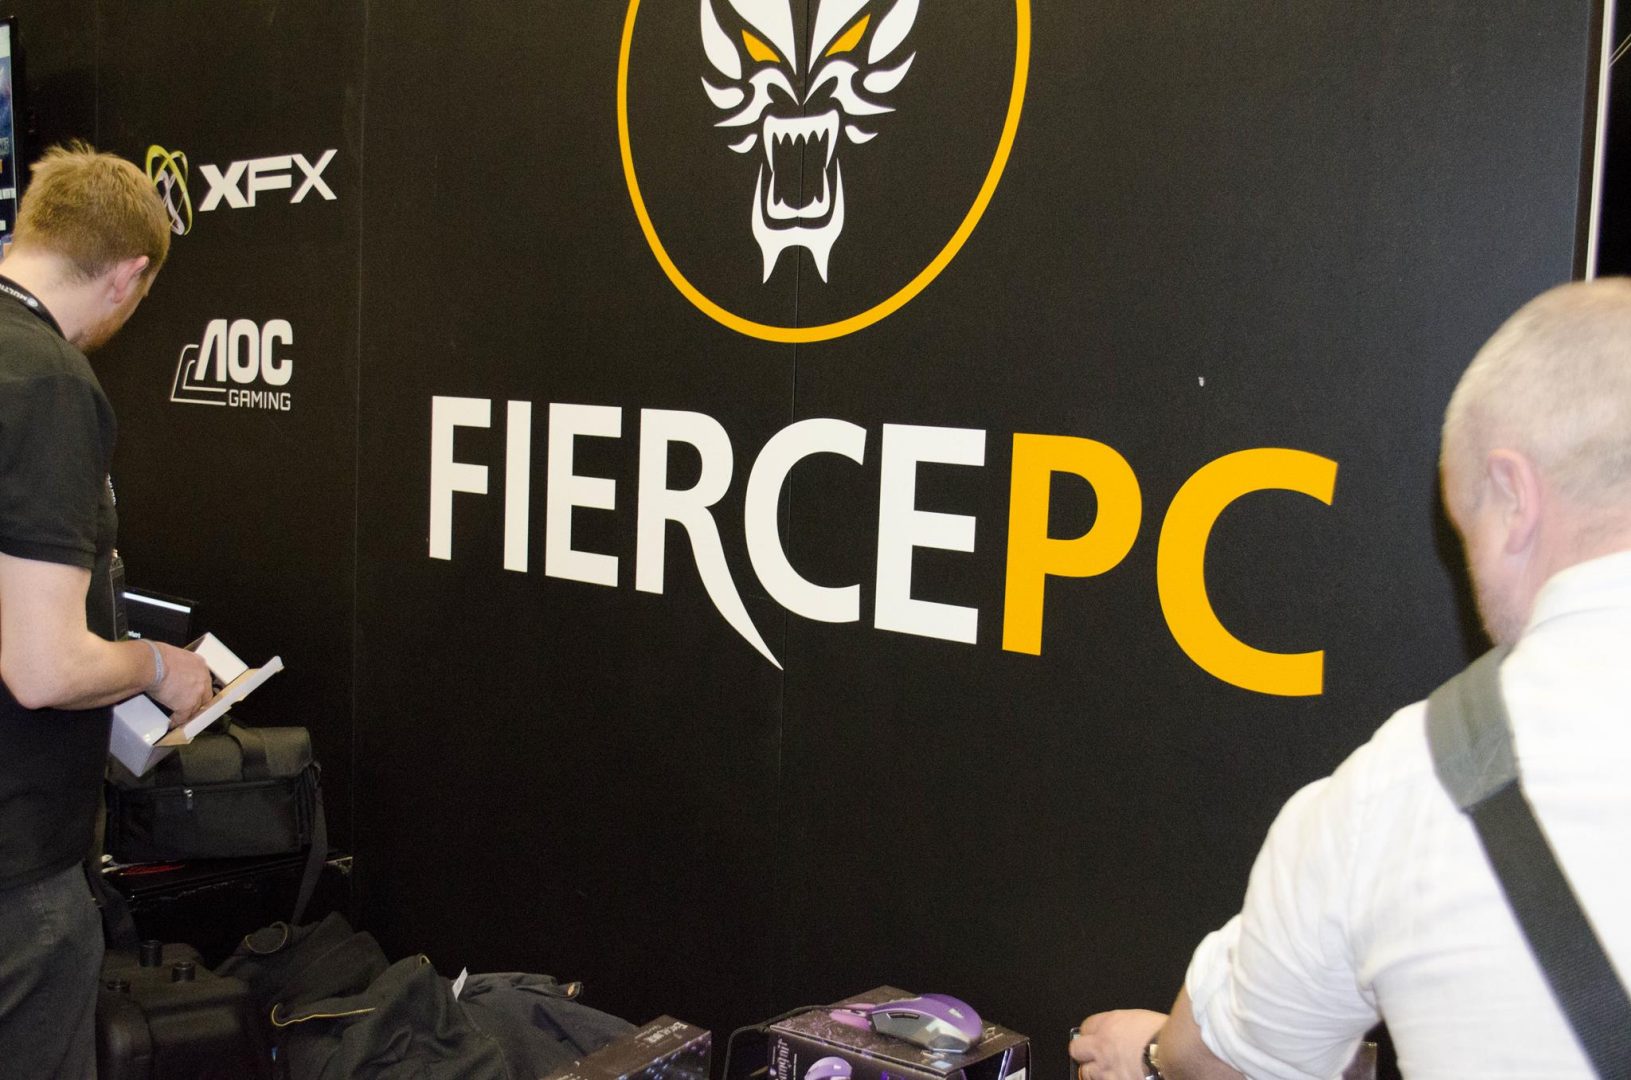 The Fierce PC Booth at I55